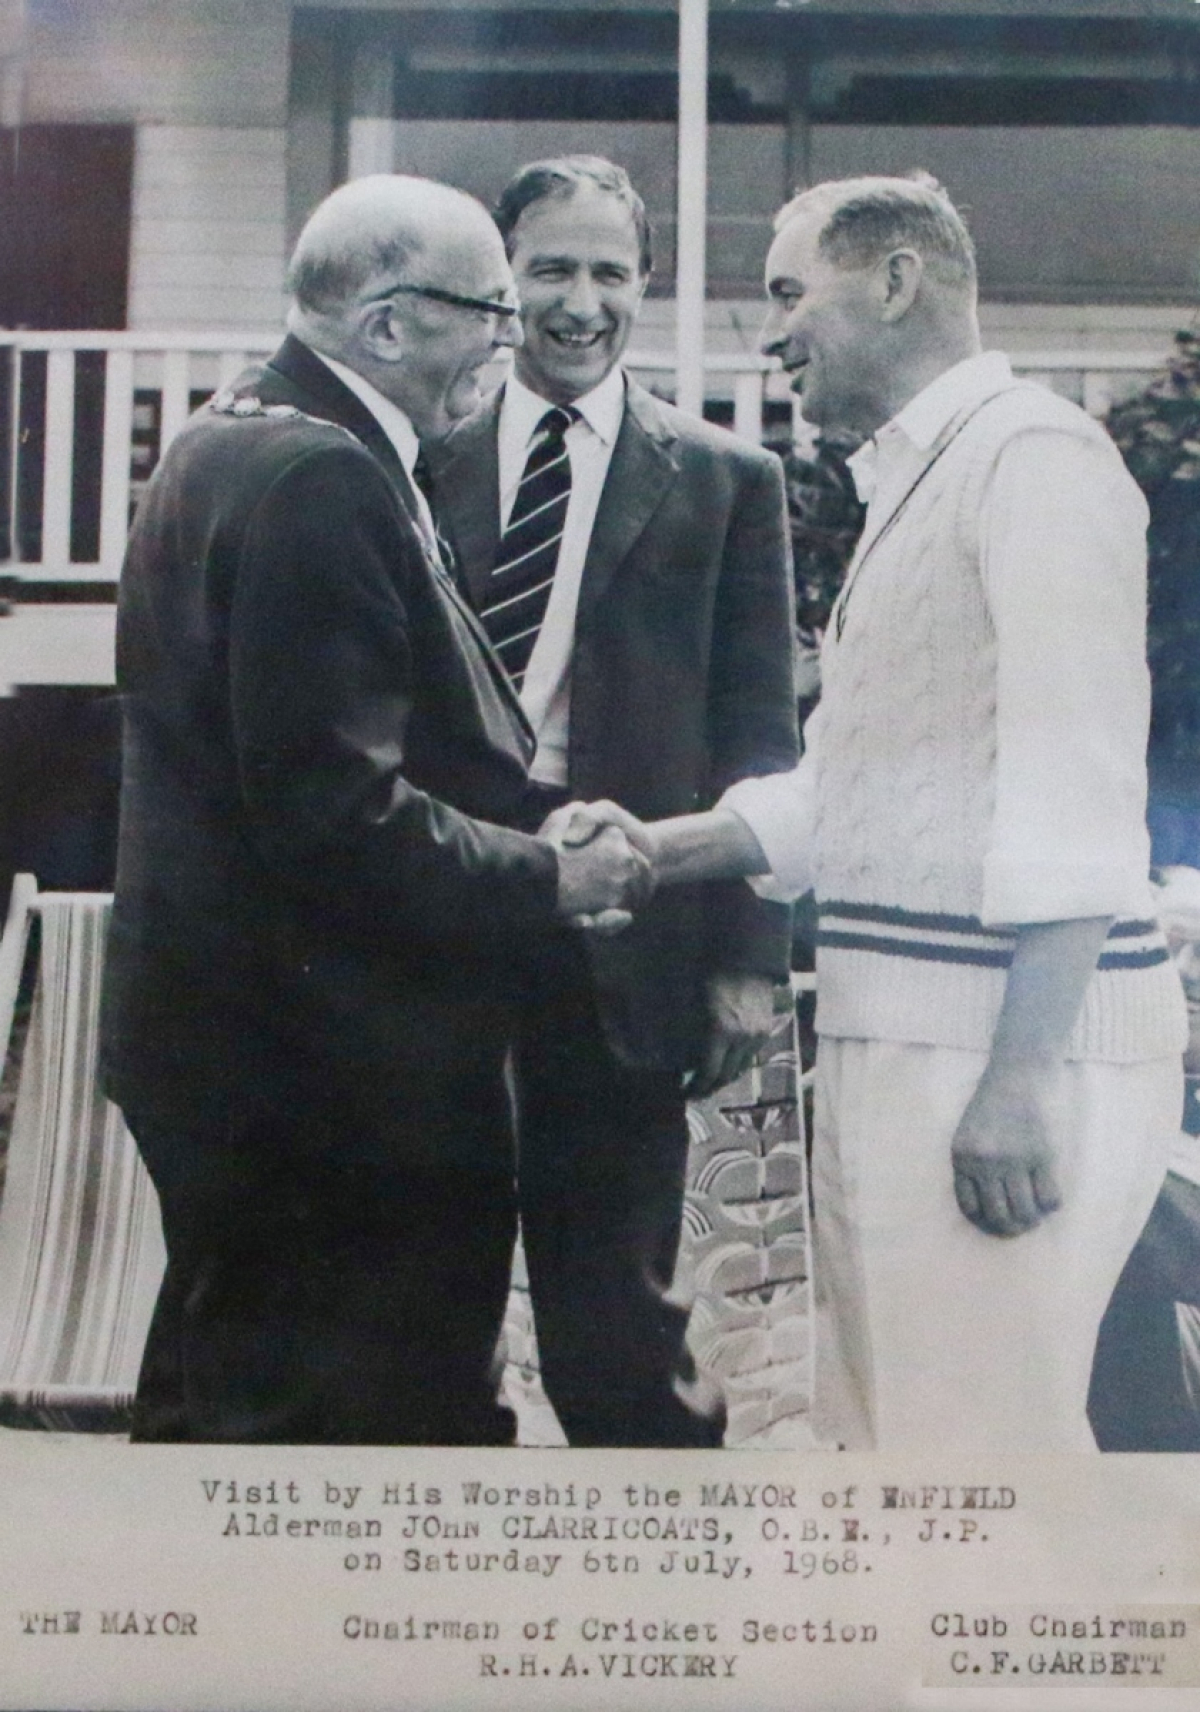 Mayor Of Enfield Visits WHCC 6th July 1968